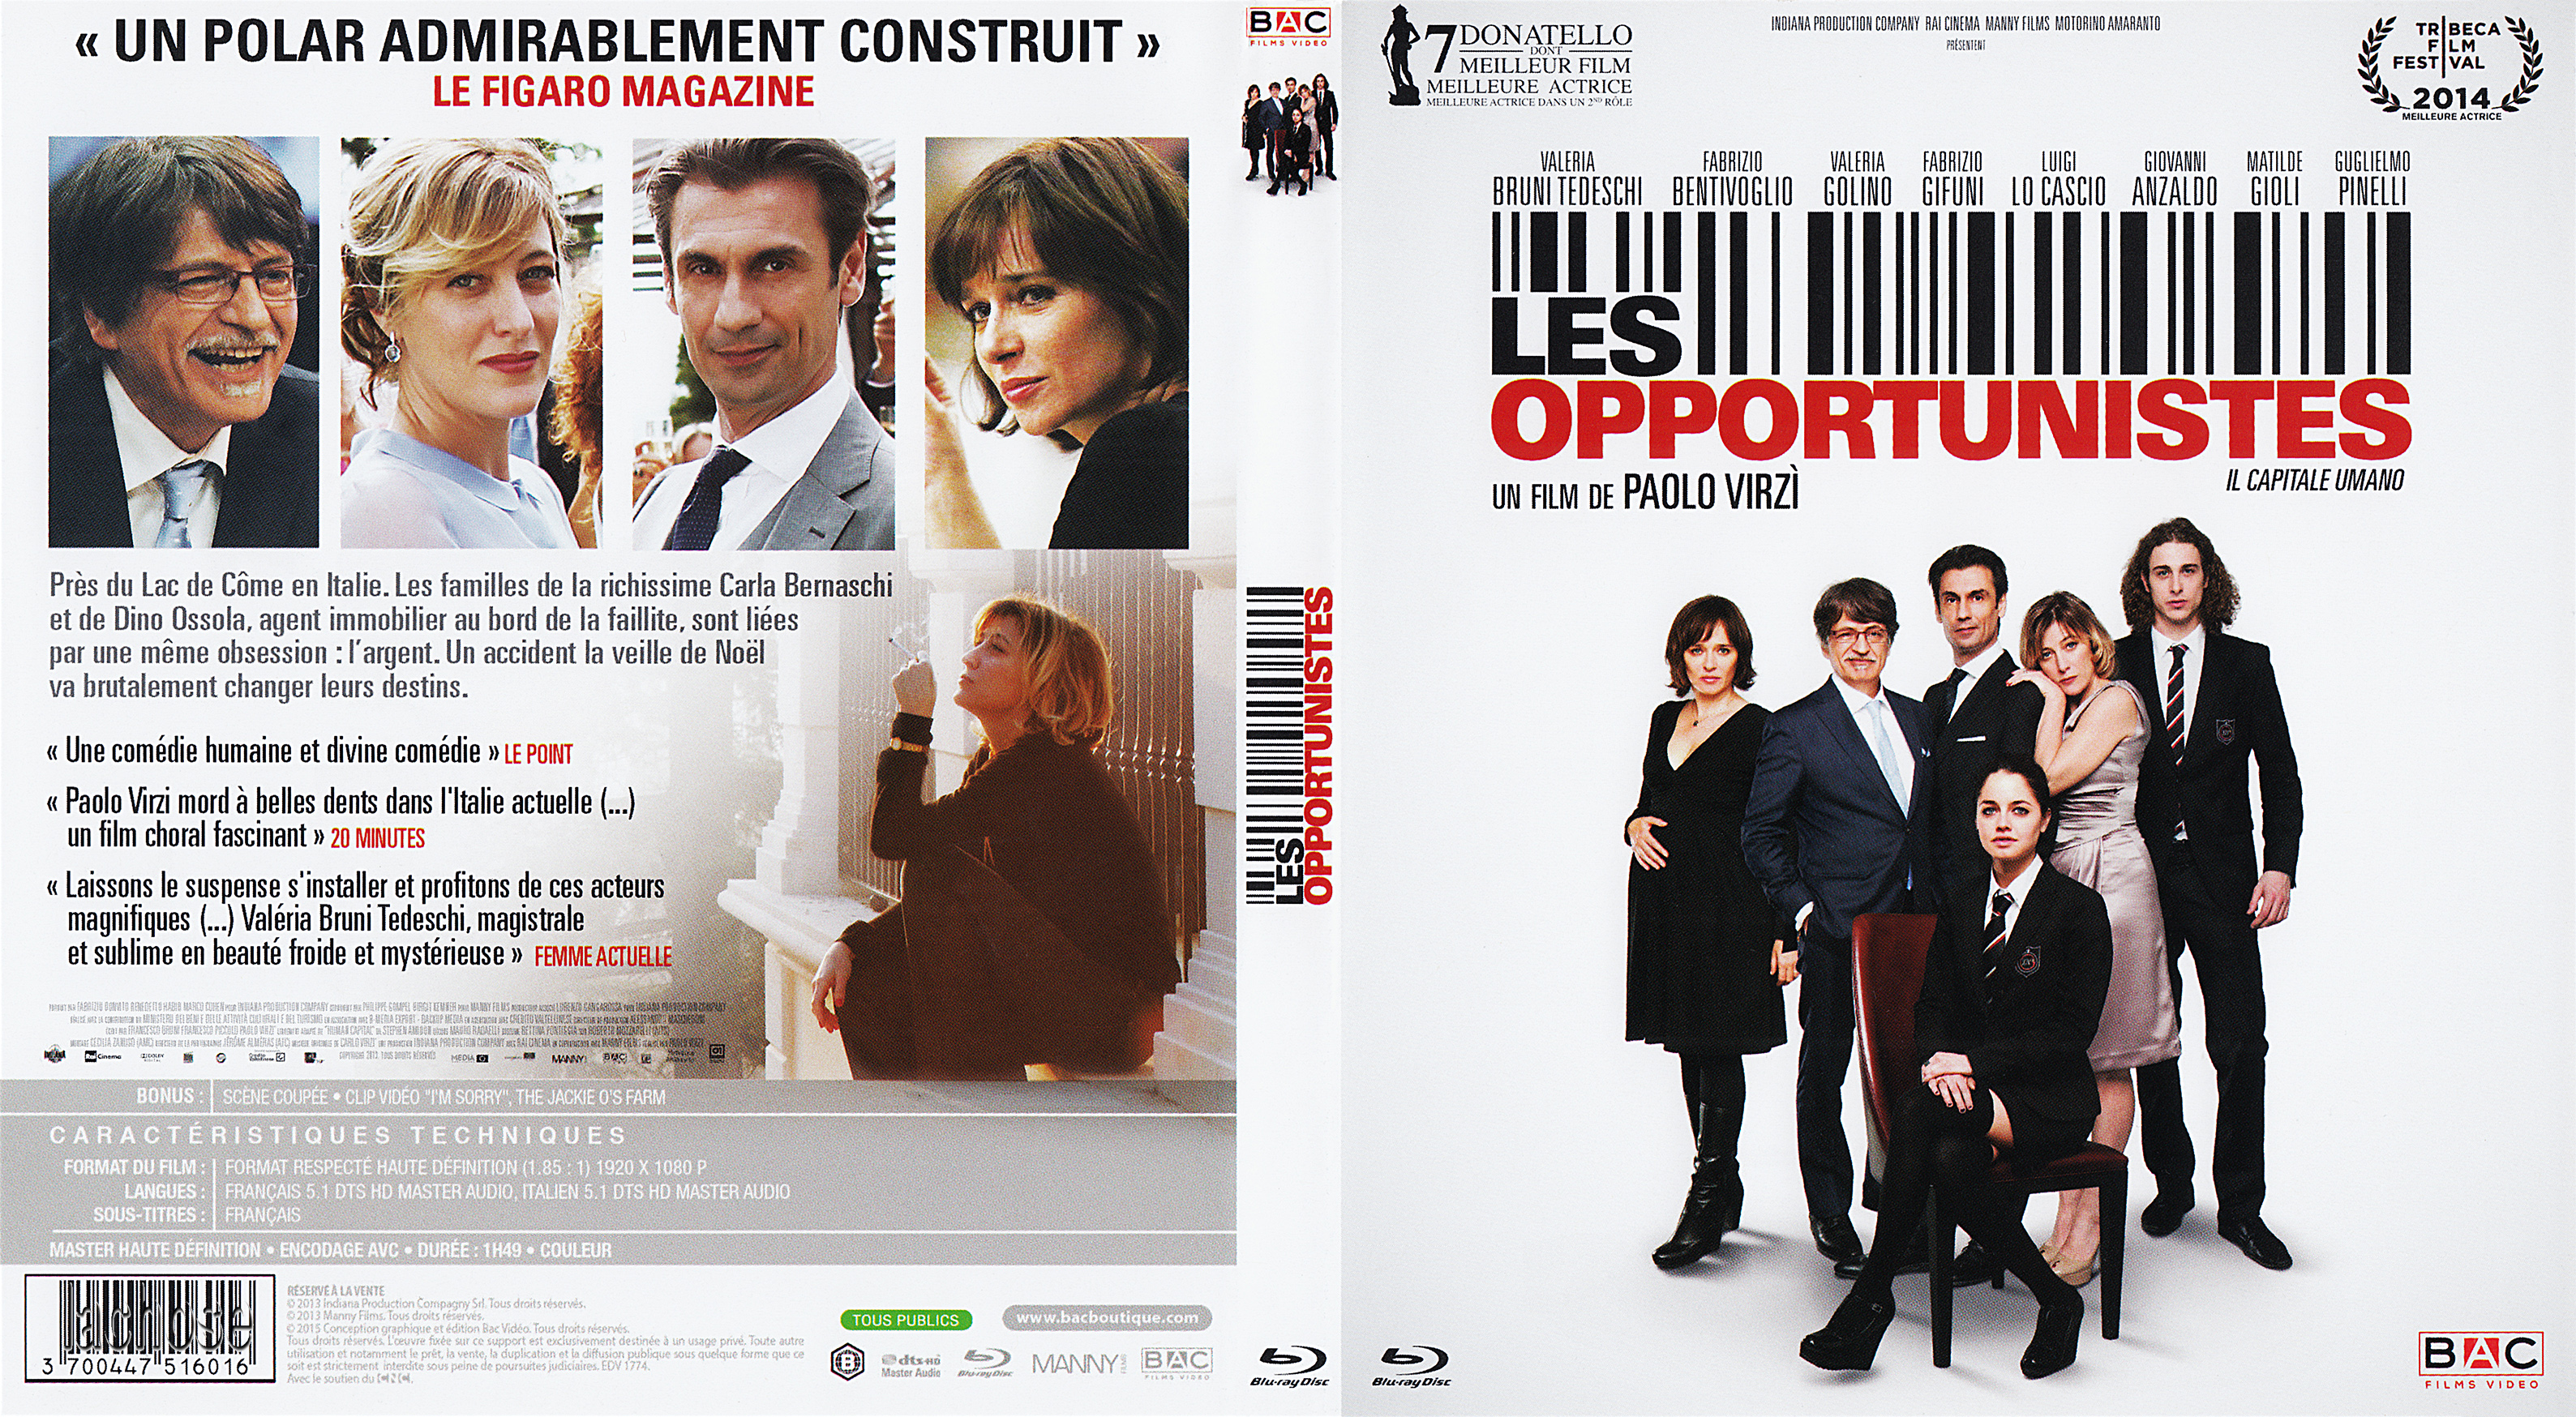 Jaquette DVD Les opportunistes 2013 (BLU-RAY)